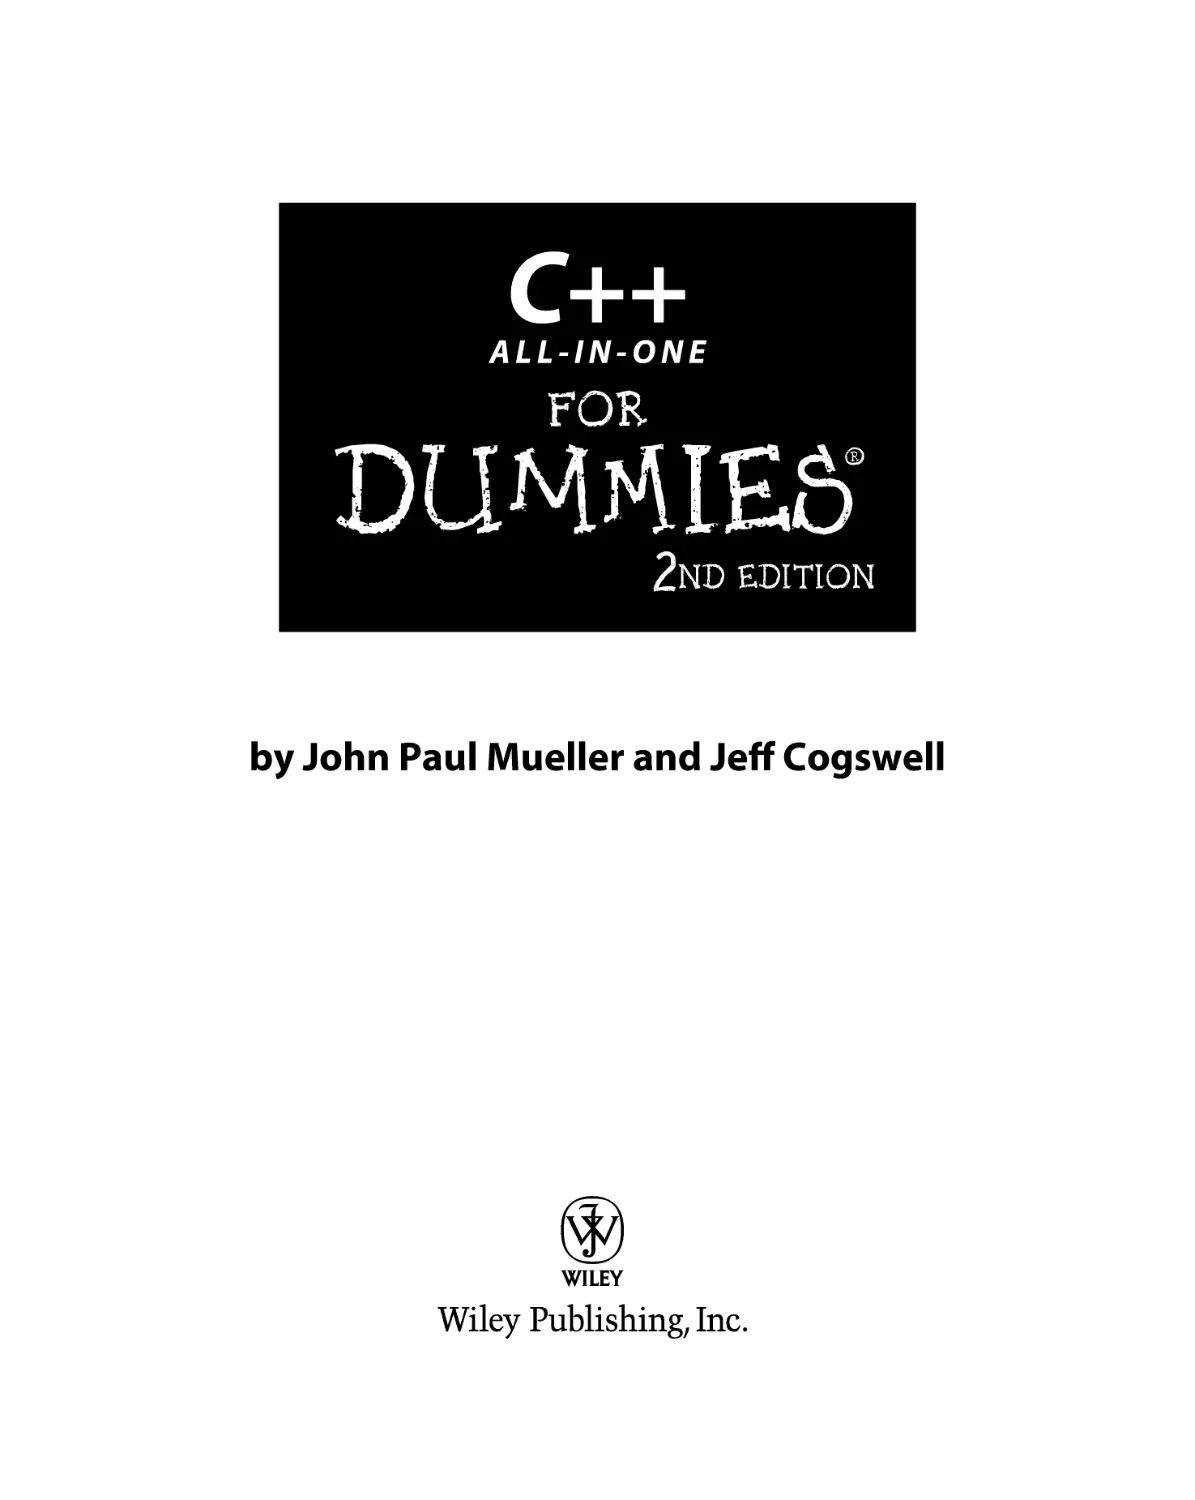 C++ All-In-One for Dummies, 2nd Edition